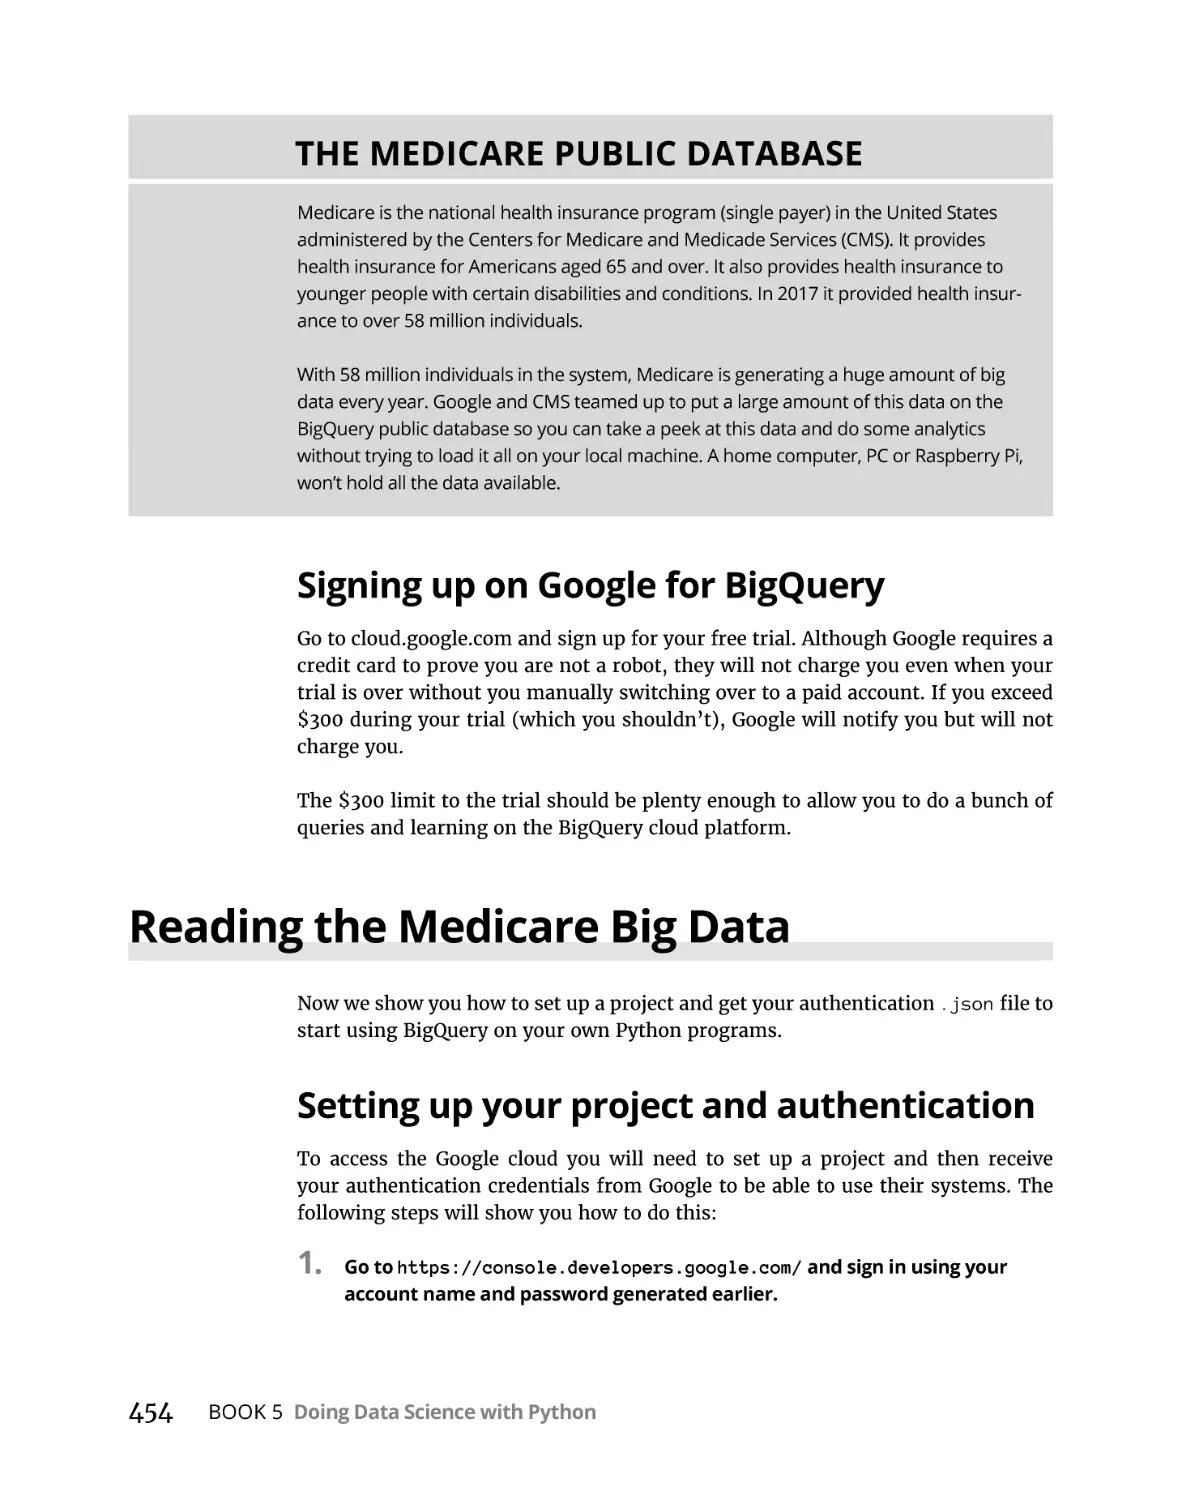 Signing up on Google for BigQuery
Reading the Medicare Big Data
Setting up your project and authentication